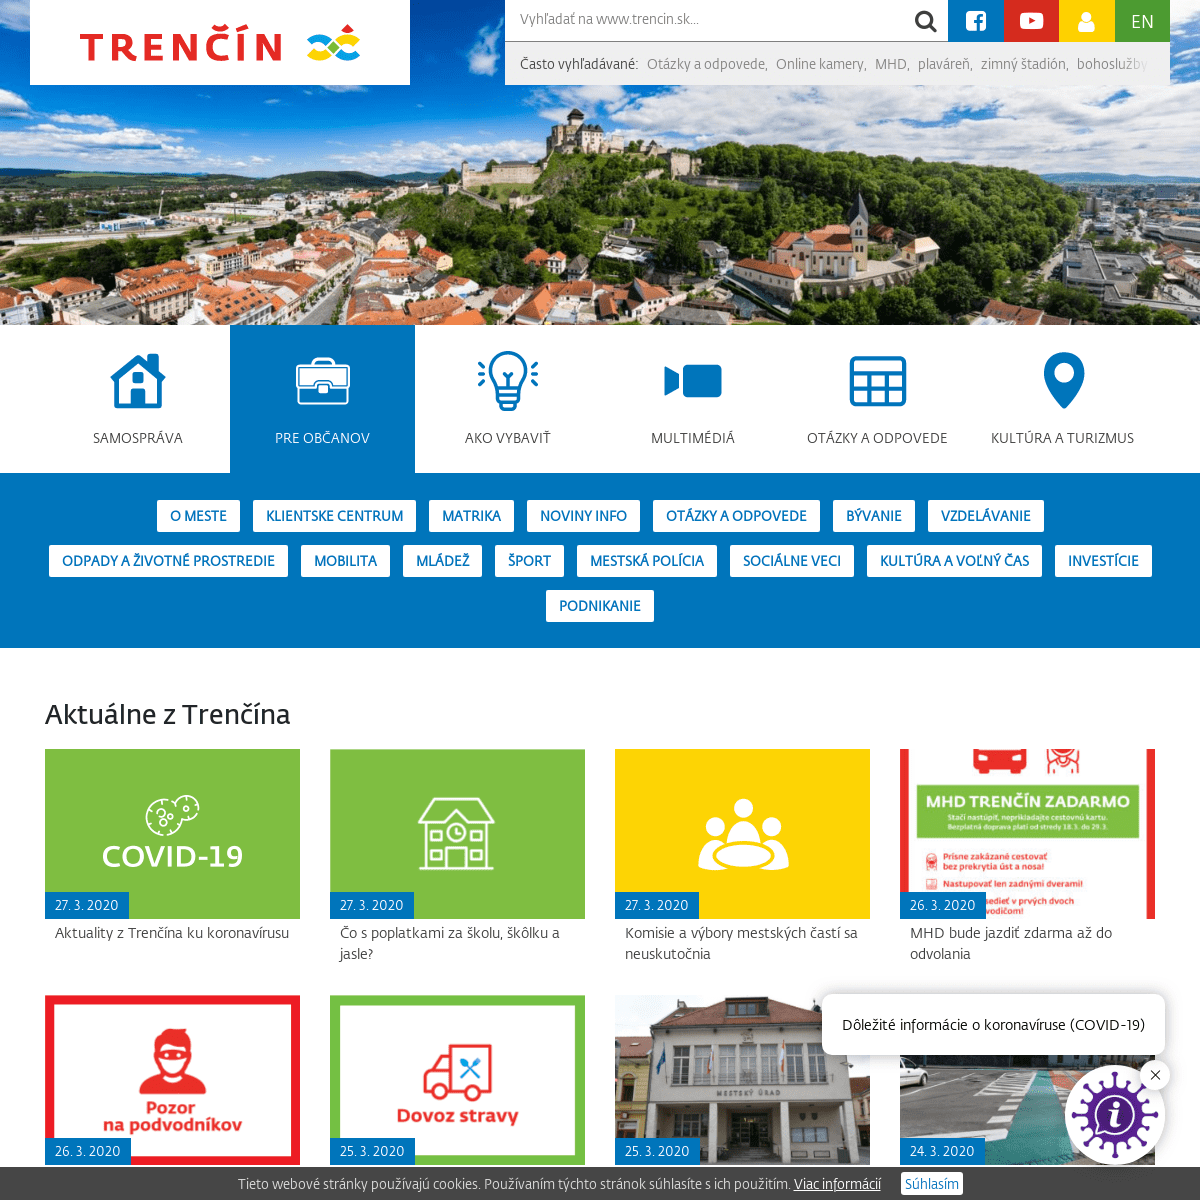 A complete backup of trencin.sk